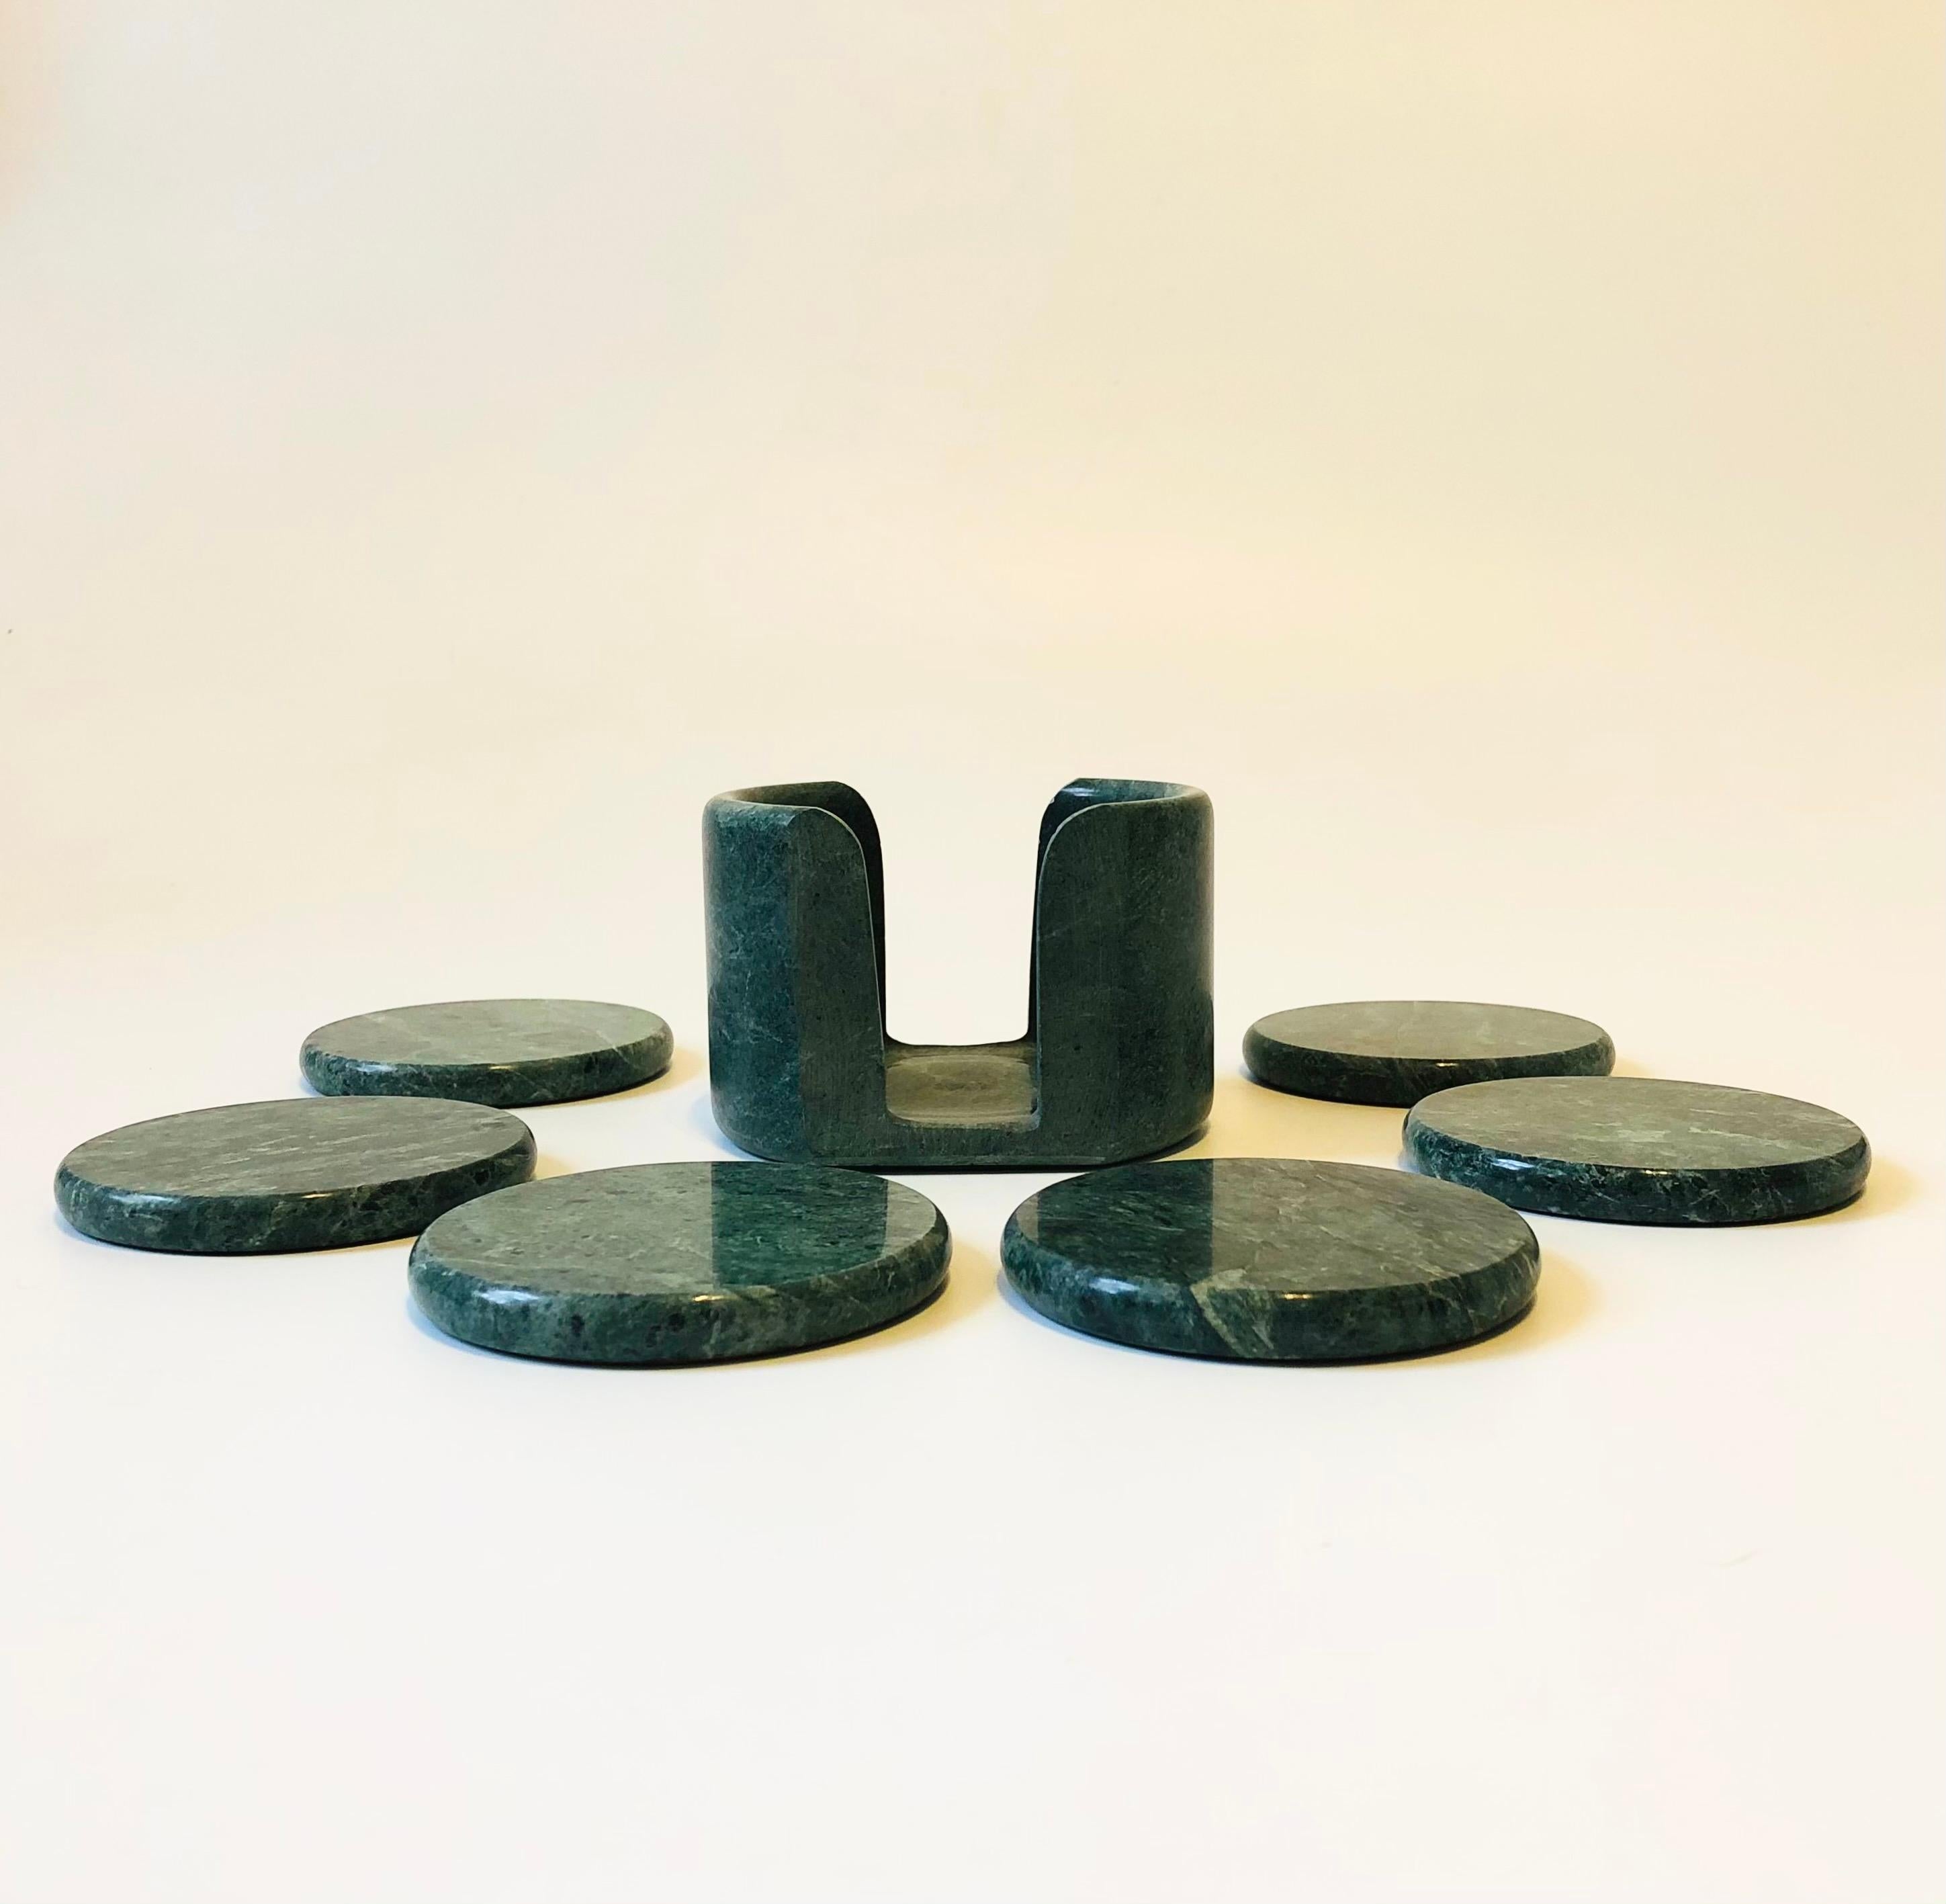 Green Stone Coaster Set - Set of 6 Coasters in Holder 3